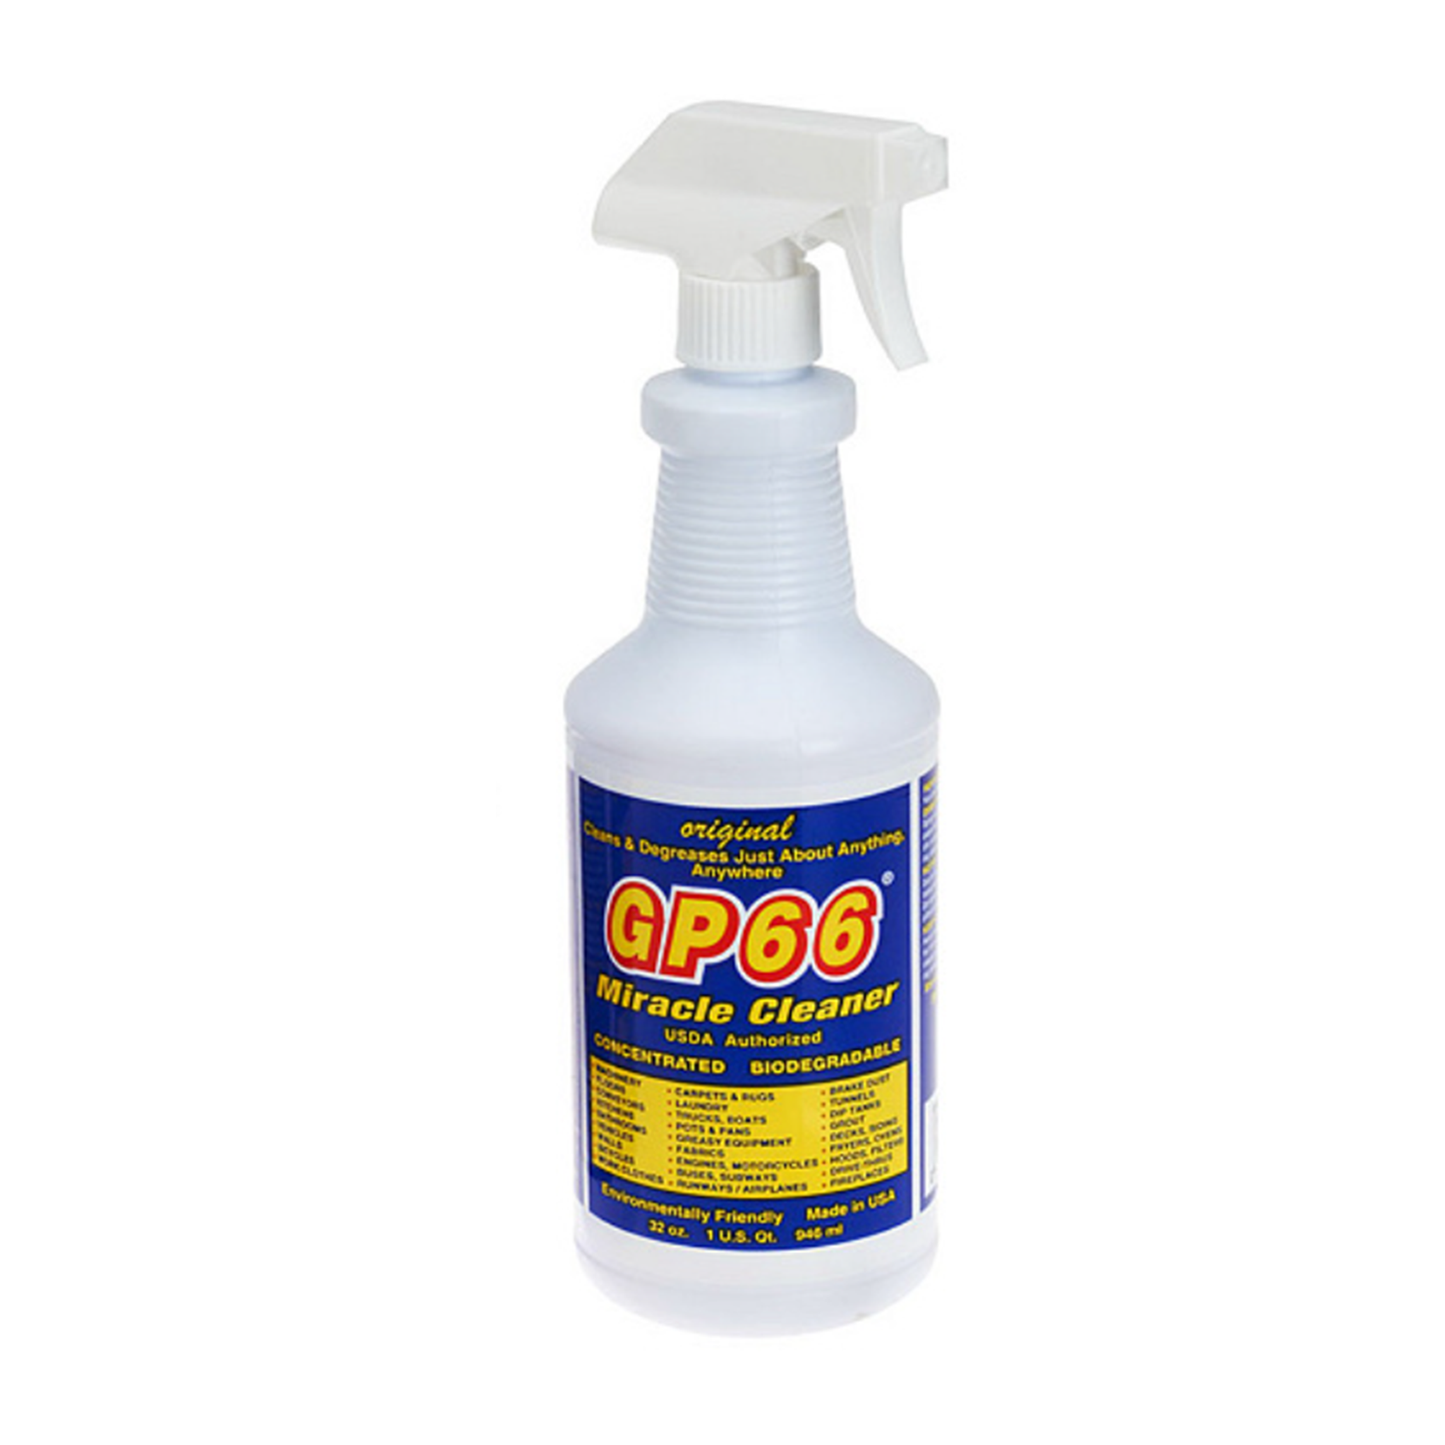 GP66 miracle cleaner super size from GP66 case of 12 quarts cleans and degreases the toughest dirt, grease, and grime from just about anything anywhere in your kitchen, bath, and laundry! Made in USA